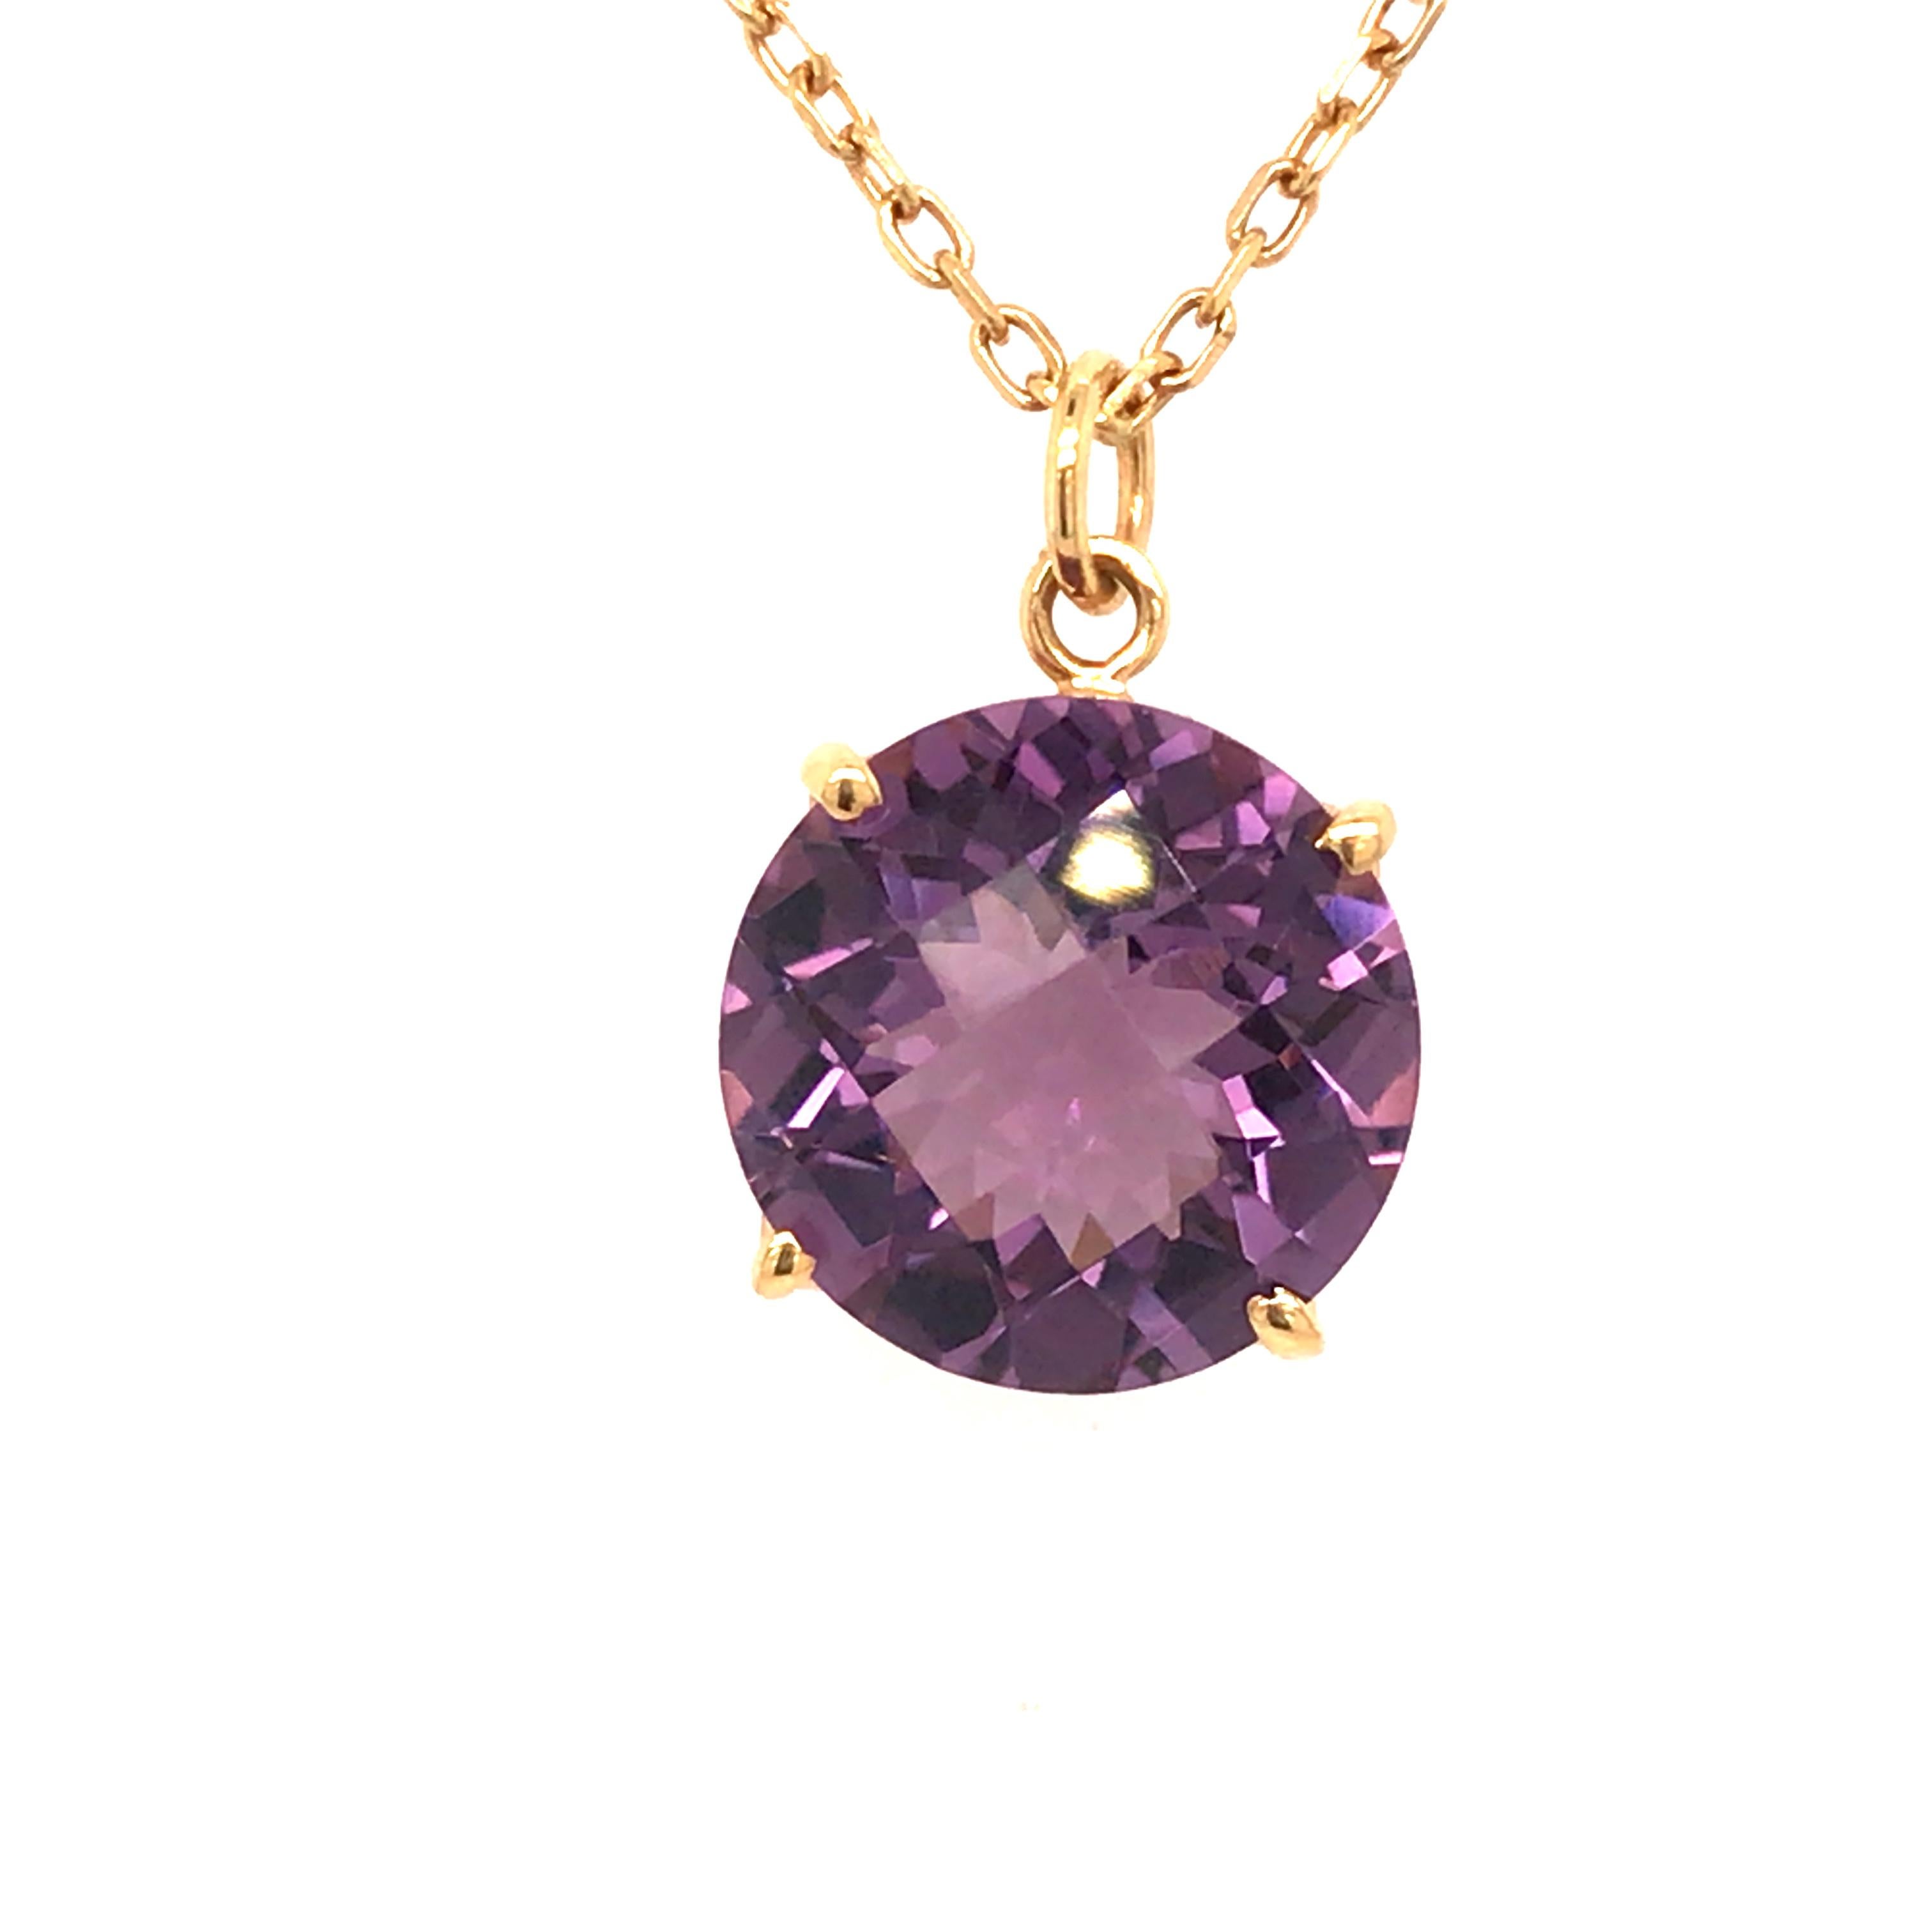 Roberto Coin Amethyst Solitaire Necklace in 18K Yellow Gold.  The Necklace measures 18 inch in length and the Pendant measures 1/2 inch in diameter.  5.44 grams.  Signed with Ruby set in the tag, trademark, 1226, 750